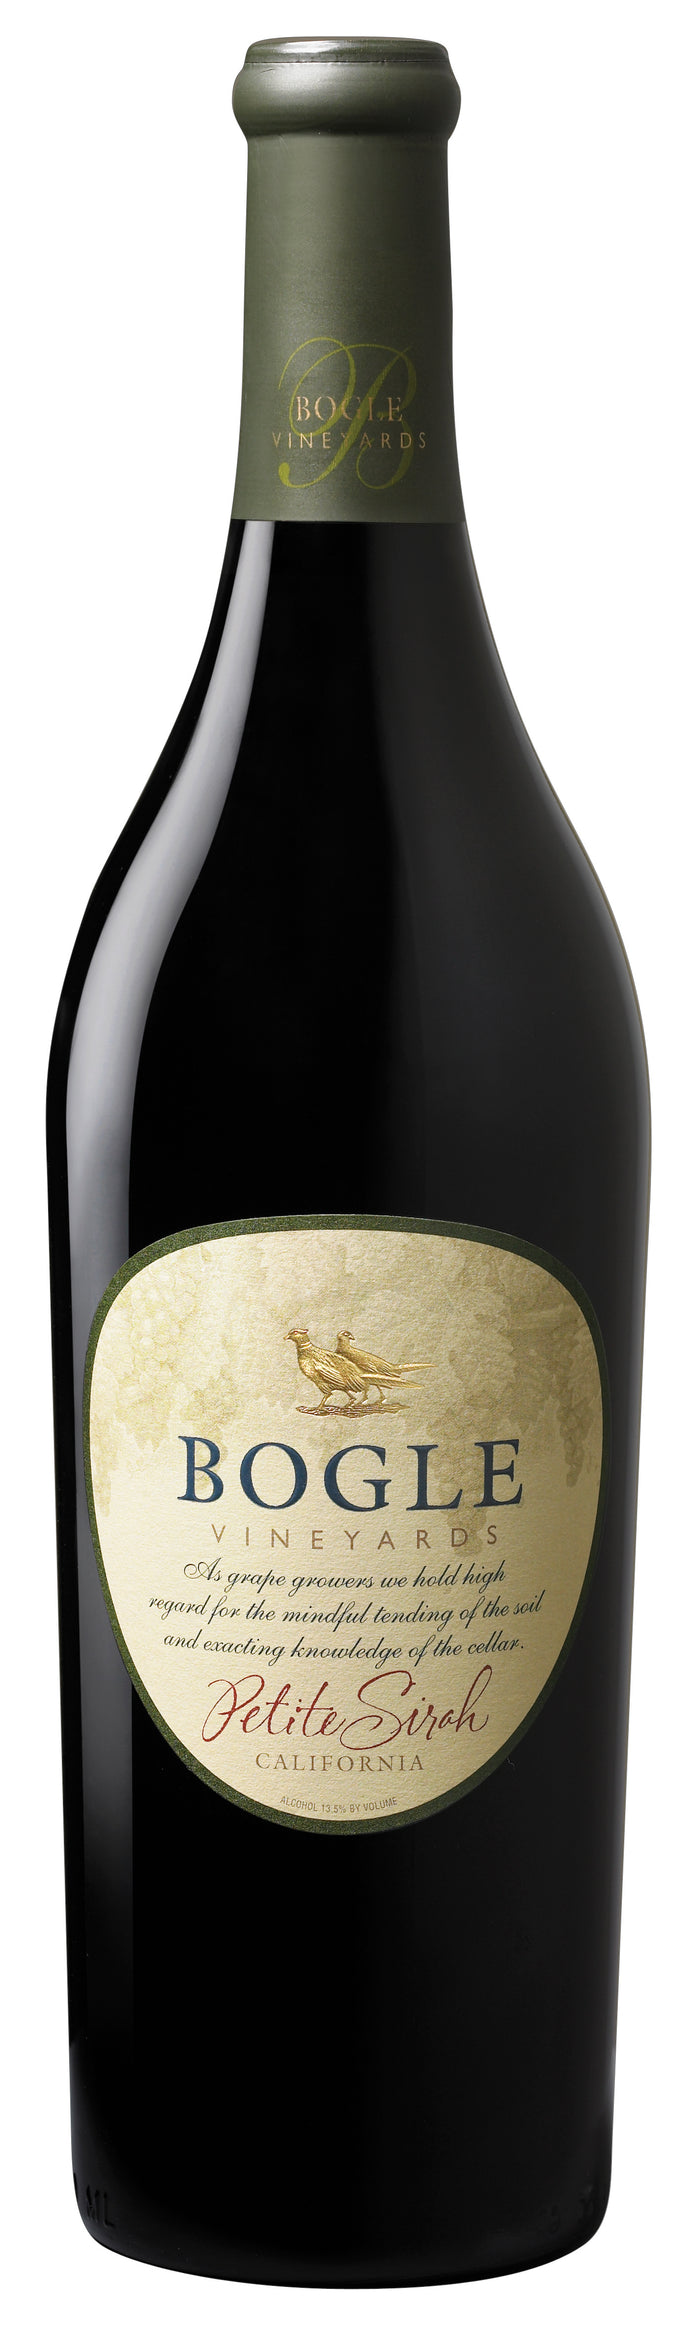 Bogle Vineyards Petite Sirah Red Wine - 750mL Type: Red Categories: 750mL, California, Petite Sirah, quantity high enough for online, region_California, size_750mL, subtype_Petite Sirah. Buy today at Wine and Liquor Mart Poughkeepsie